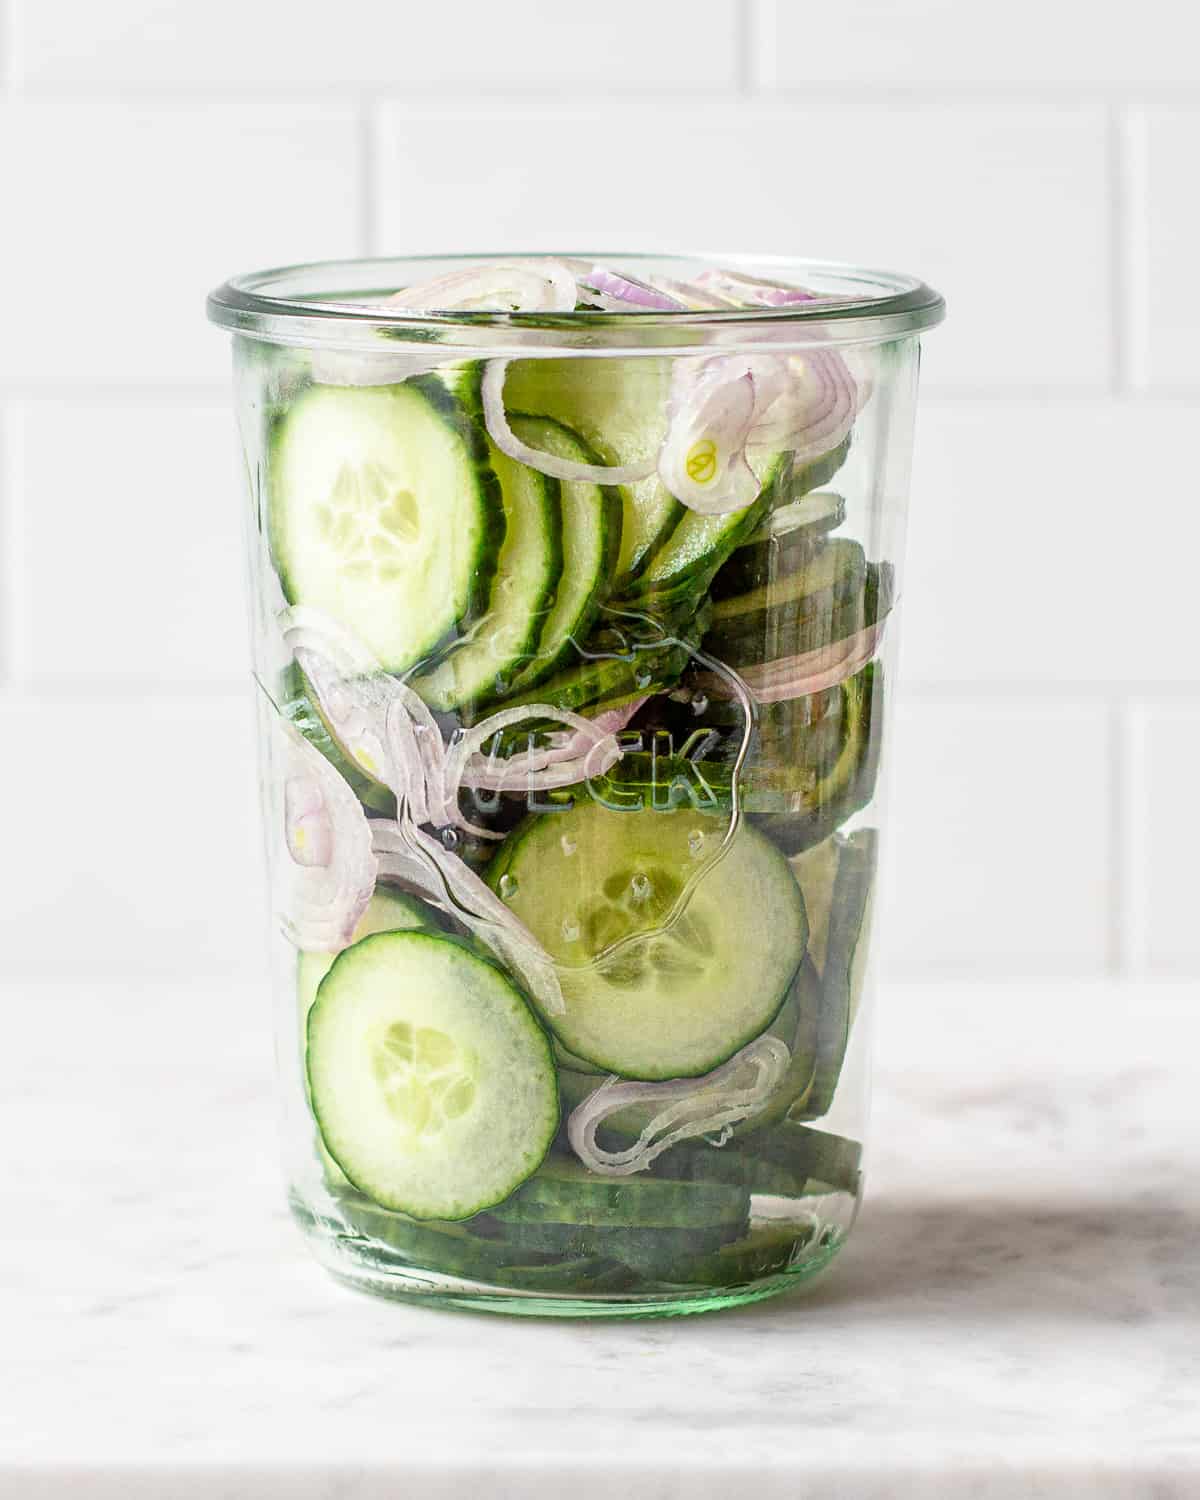 Sliced cucumbers and shallots in a tall Weck jar.